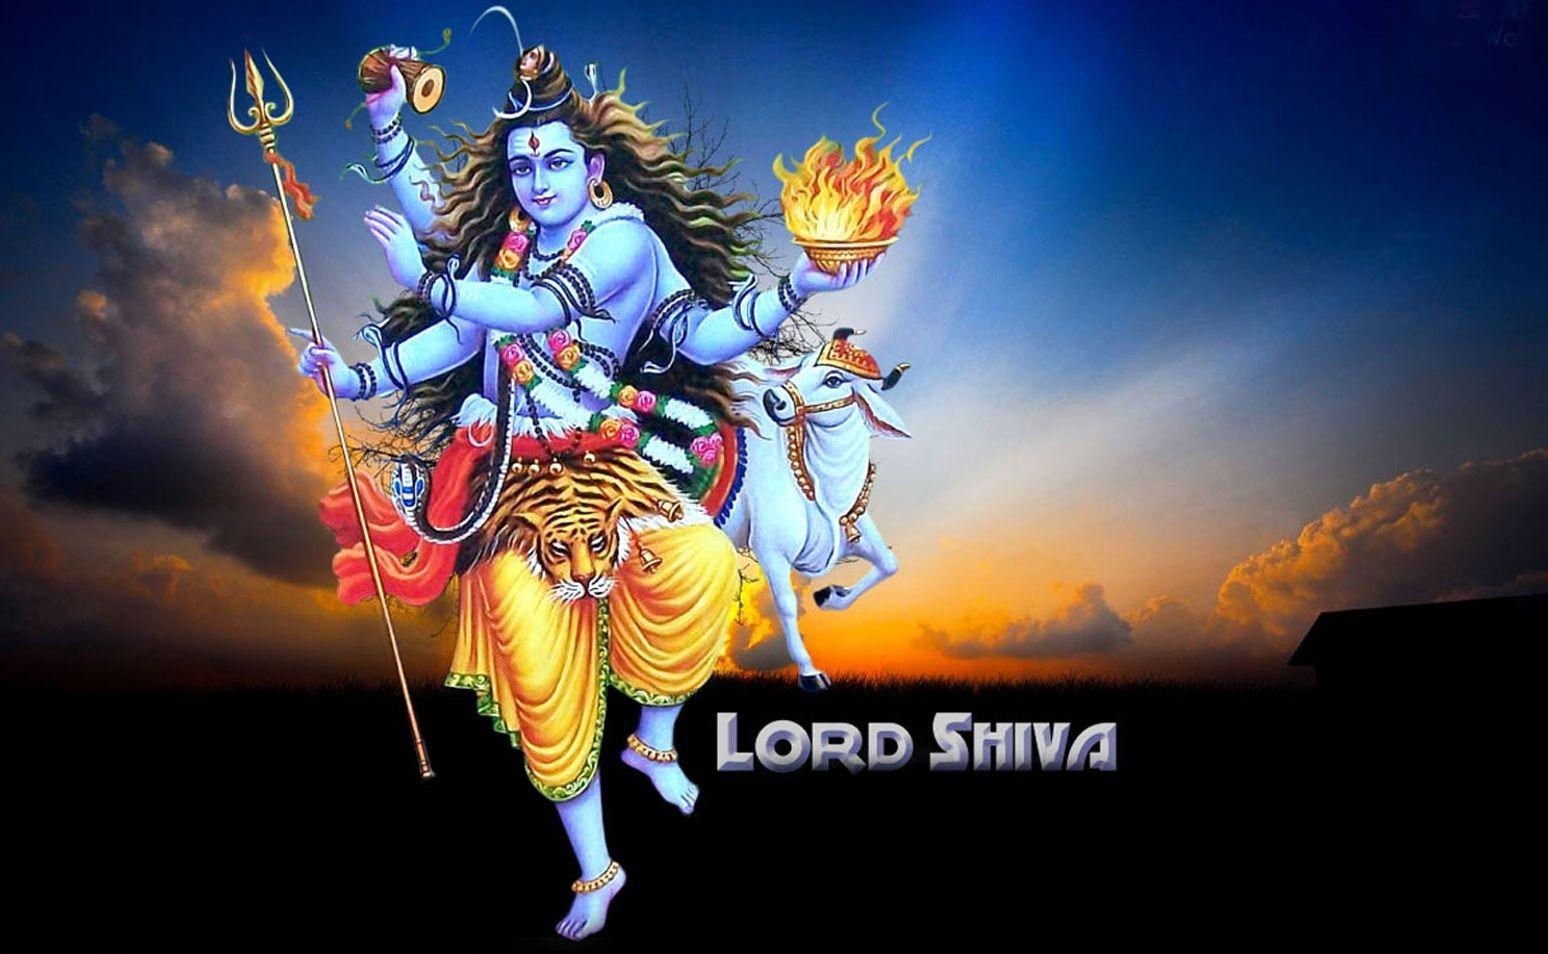 Lord Shiva HD Wallpapers - Top Free Lord Shiva HD Backgrounds ...